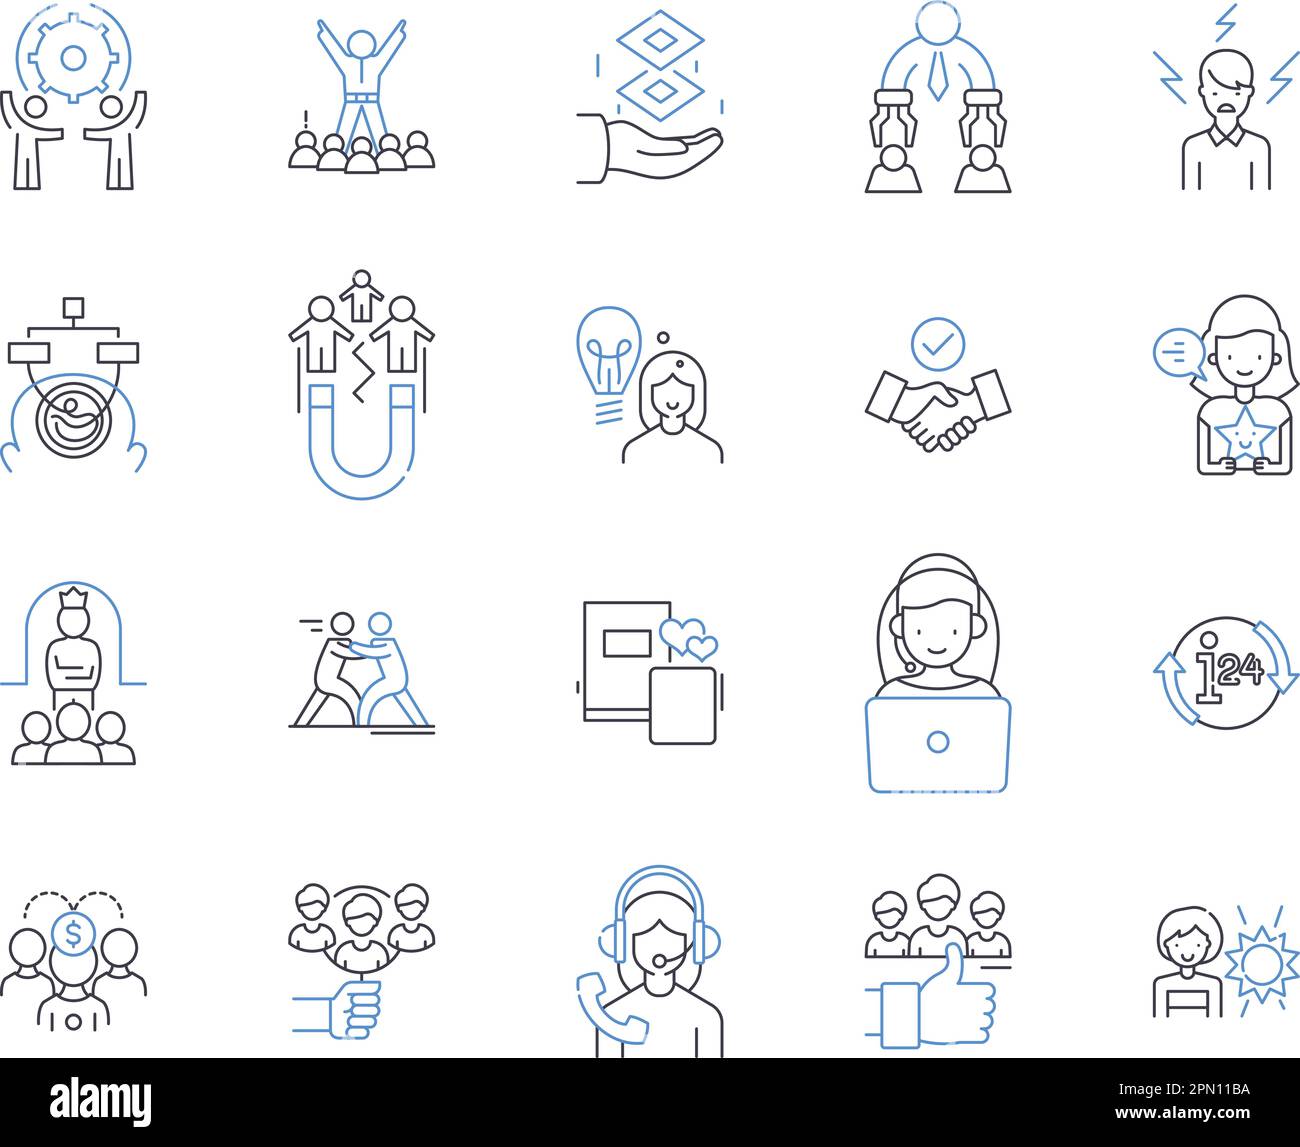 Coaching and business outline icons collection. Coaching, Business, Consulting, Training, Mentorship, Leadership, Strategy vector and illustration Stock Vector